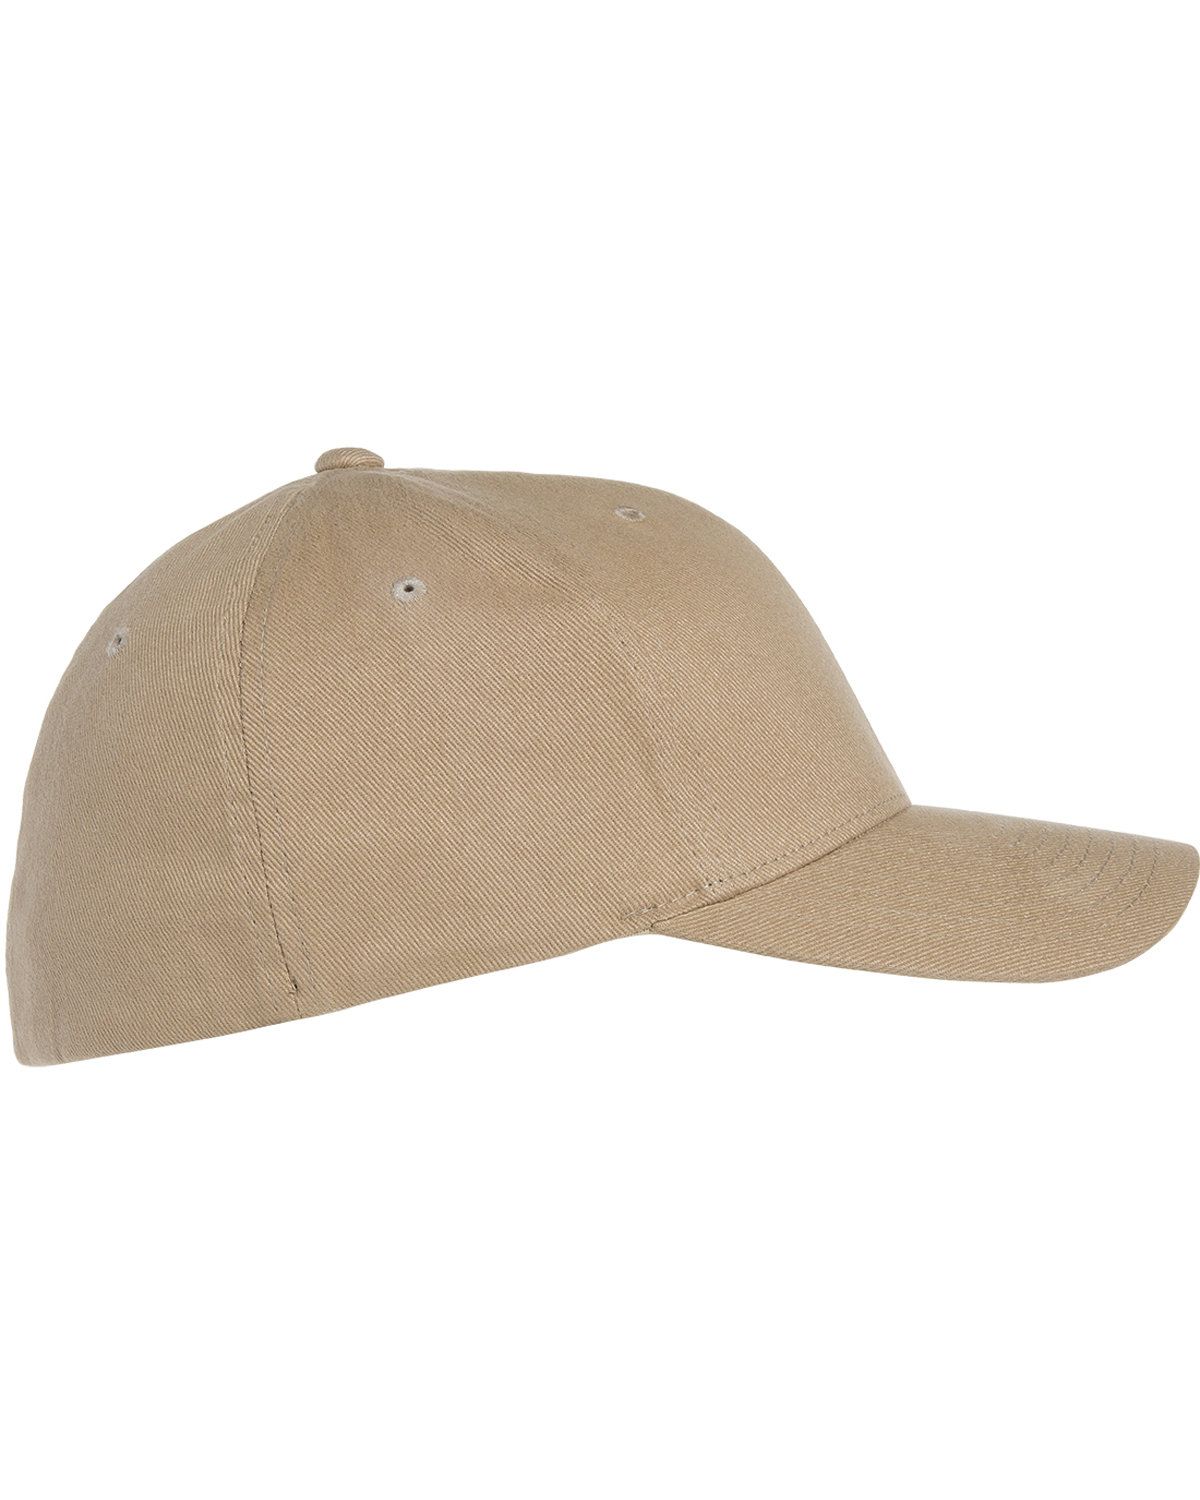 'Flexfit 6377 Adult Structured Brushed Twill Cap'